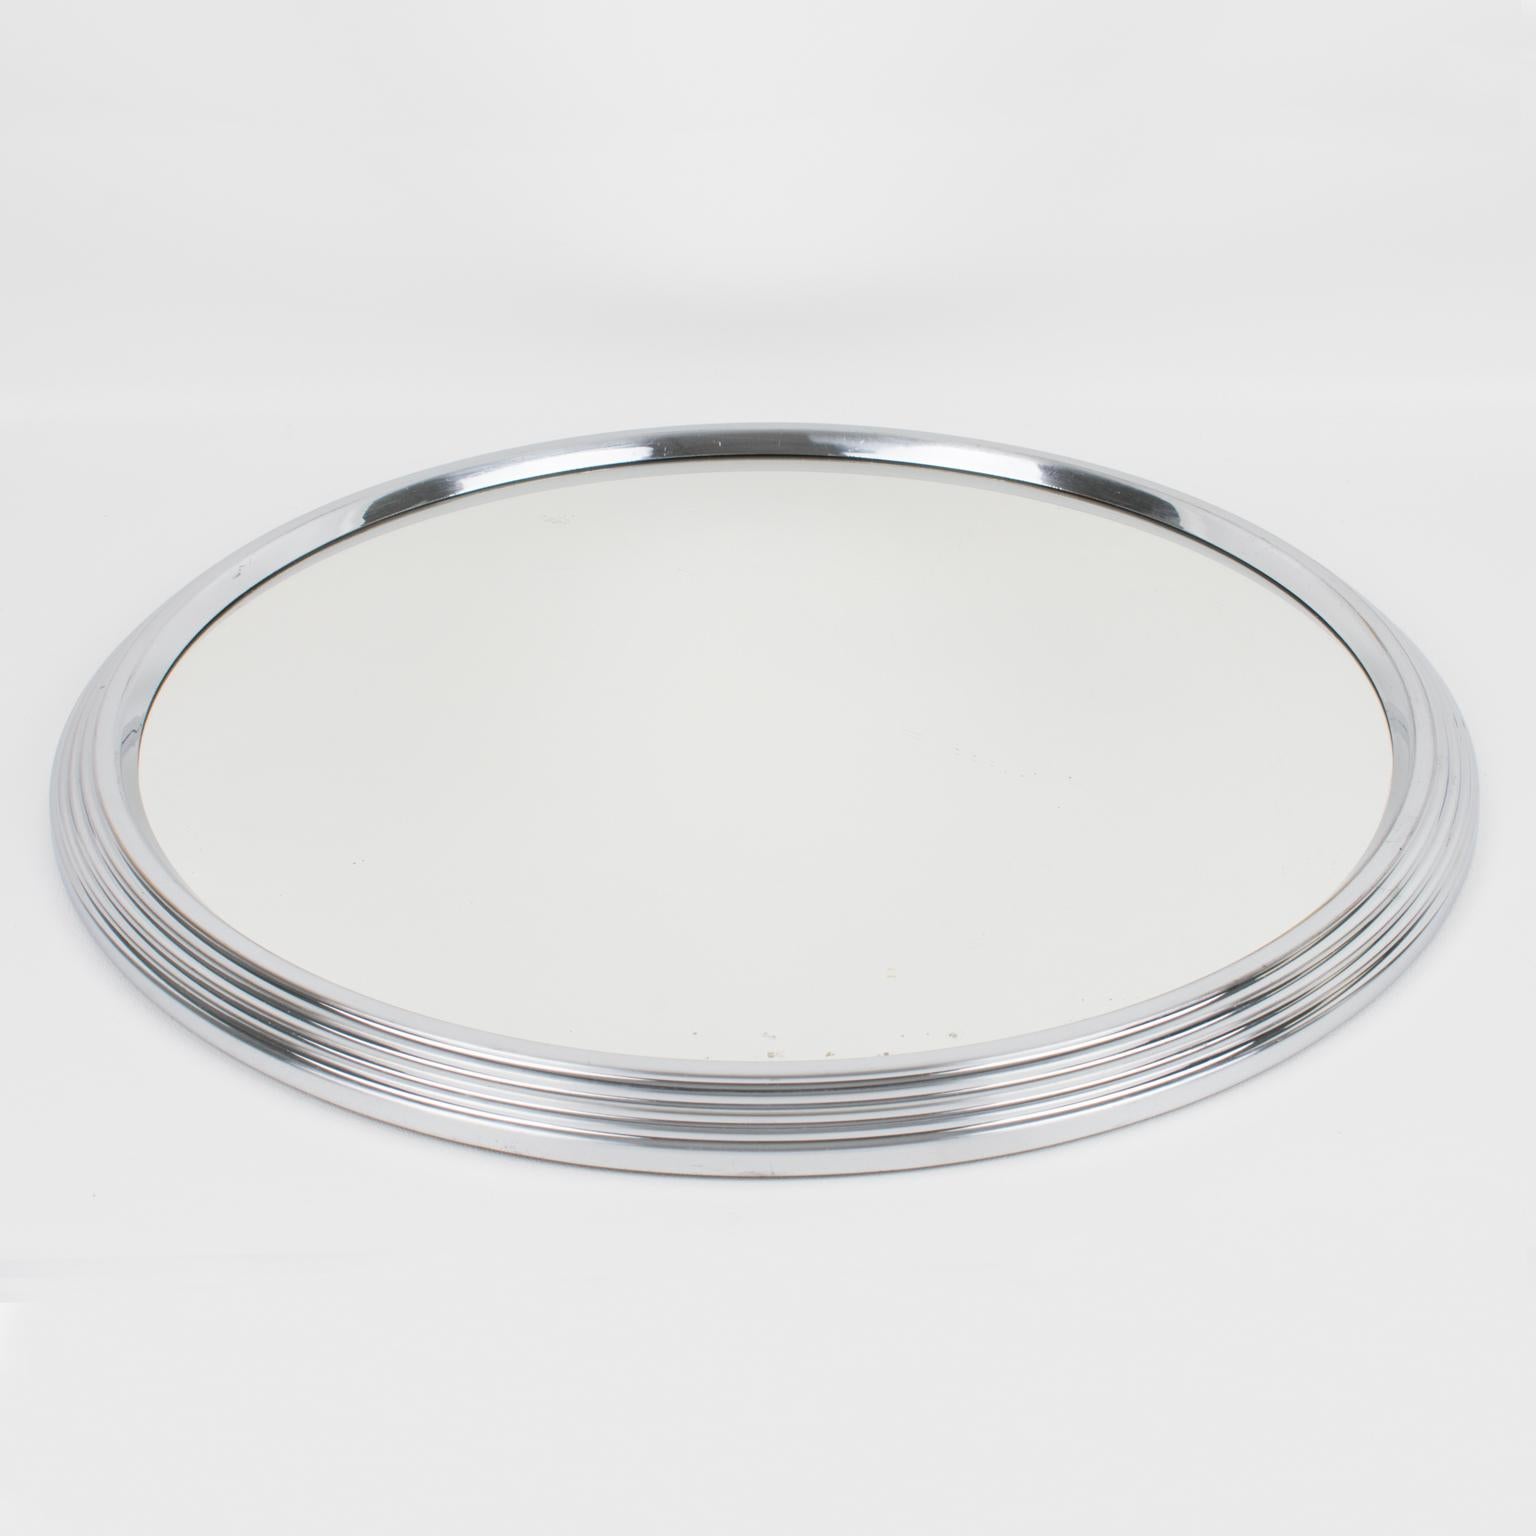 Oversized modernist French cocktail serving tray. Machine Age industrial design with chromed metal round stepped shape and mirror insert.
Measurements: 16.94 in. diameter (43 cm) x 1.57 in. high (4 cm).
(barware accessories not included in the